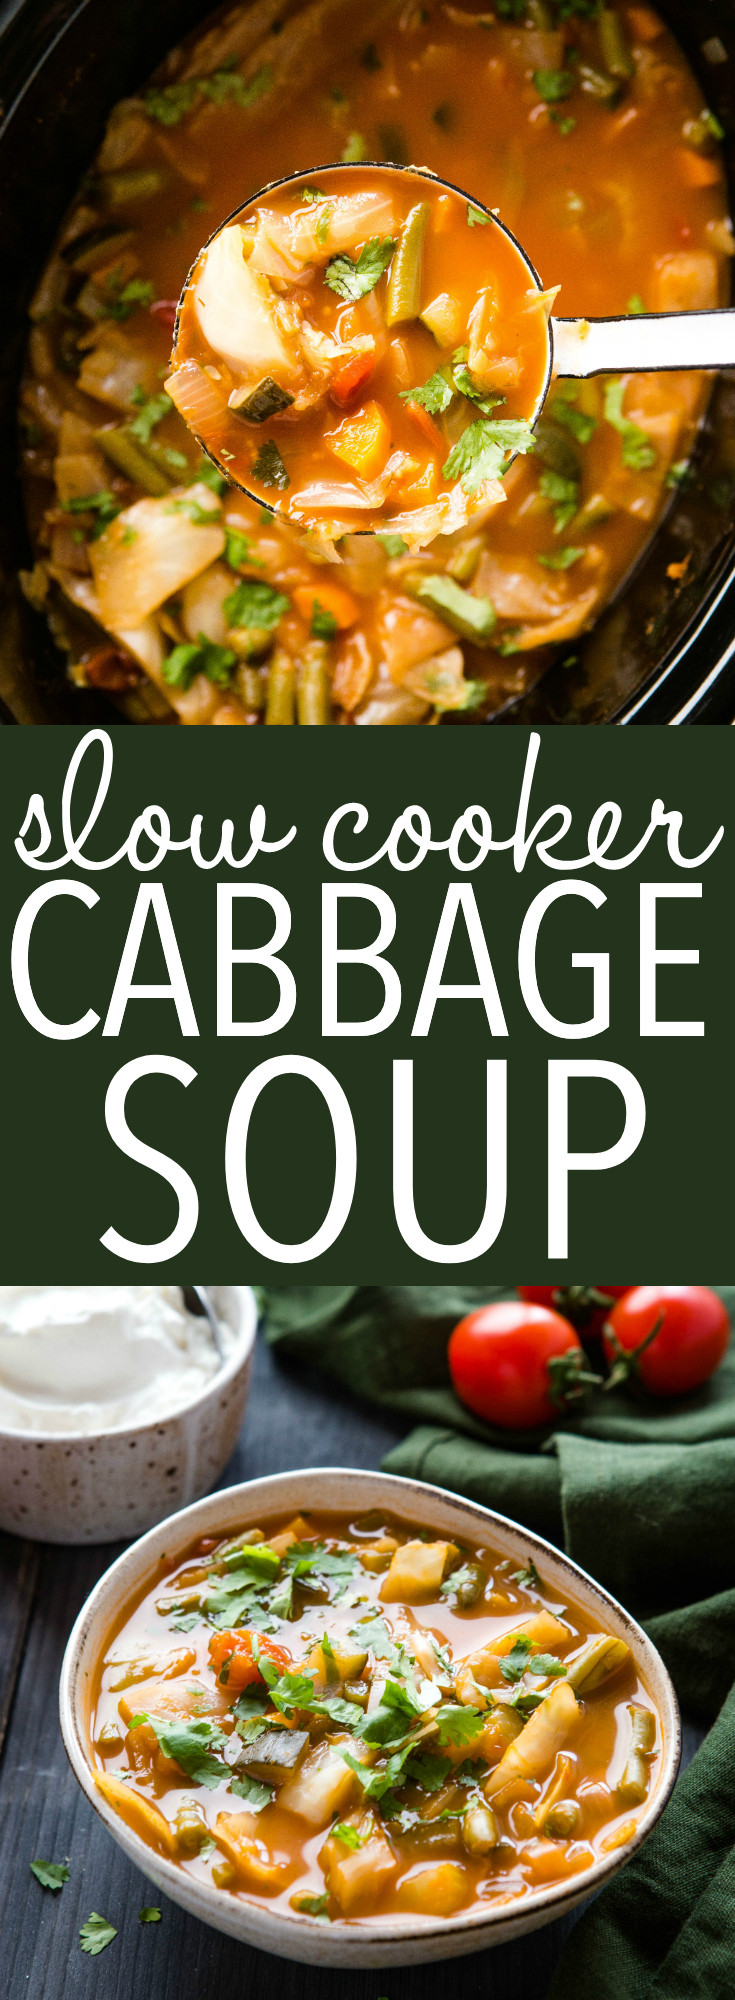 Slow Cooker Cabbage Soup
 Crock Pot Cabbage Soup Low Carb Keto The Busy Baker